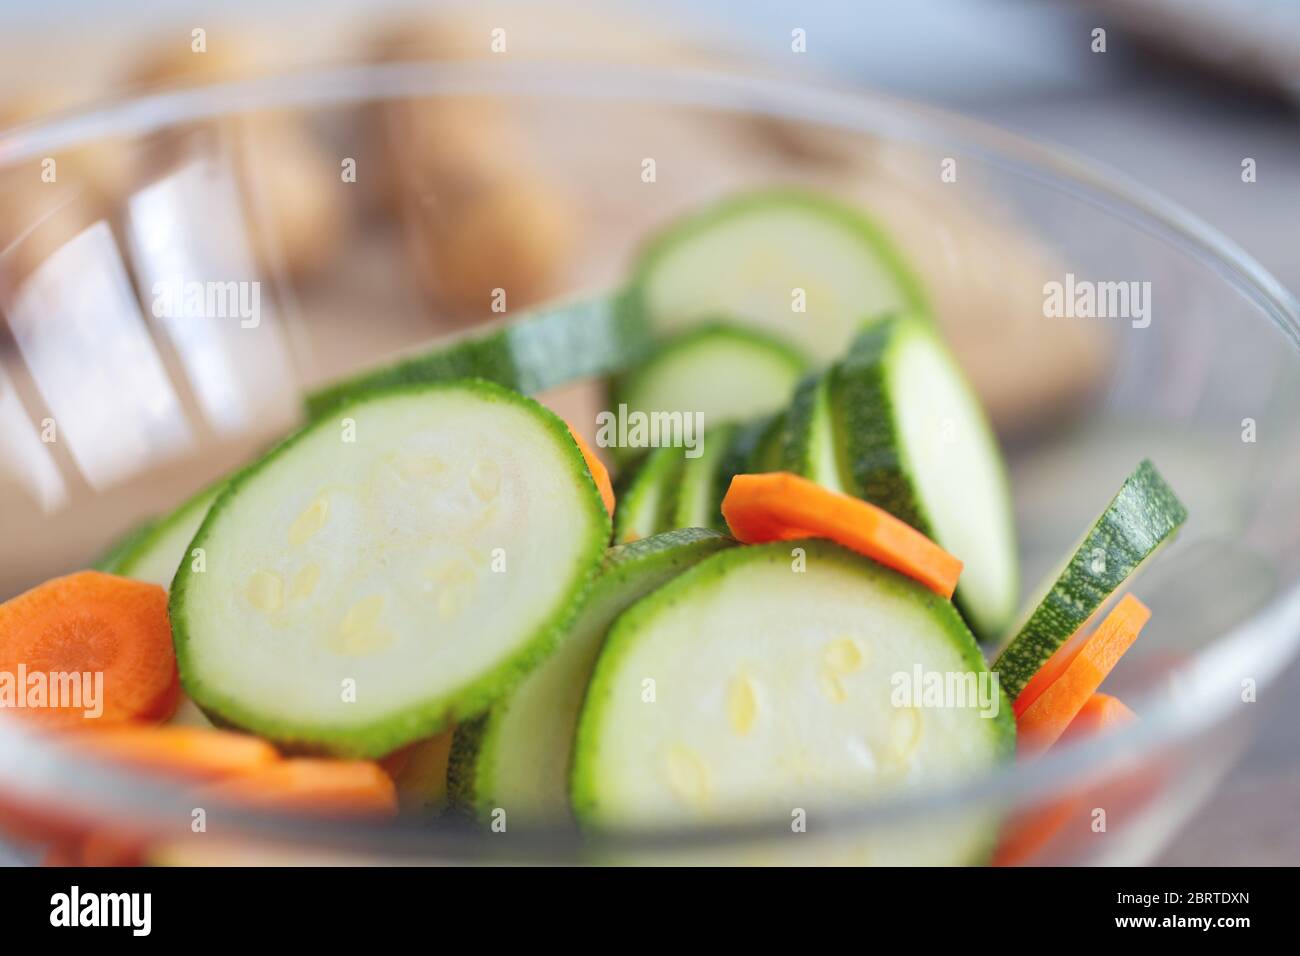 Close up of green zucchini cucumber and carrot slices in a bowl. Healthy food preparation concept Stock Photo